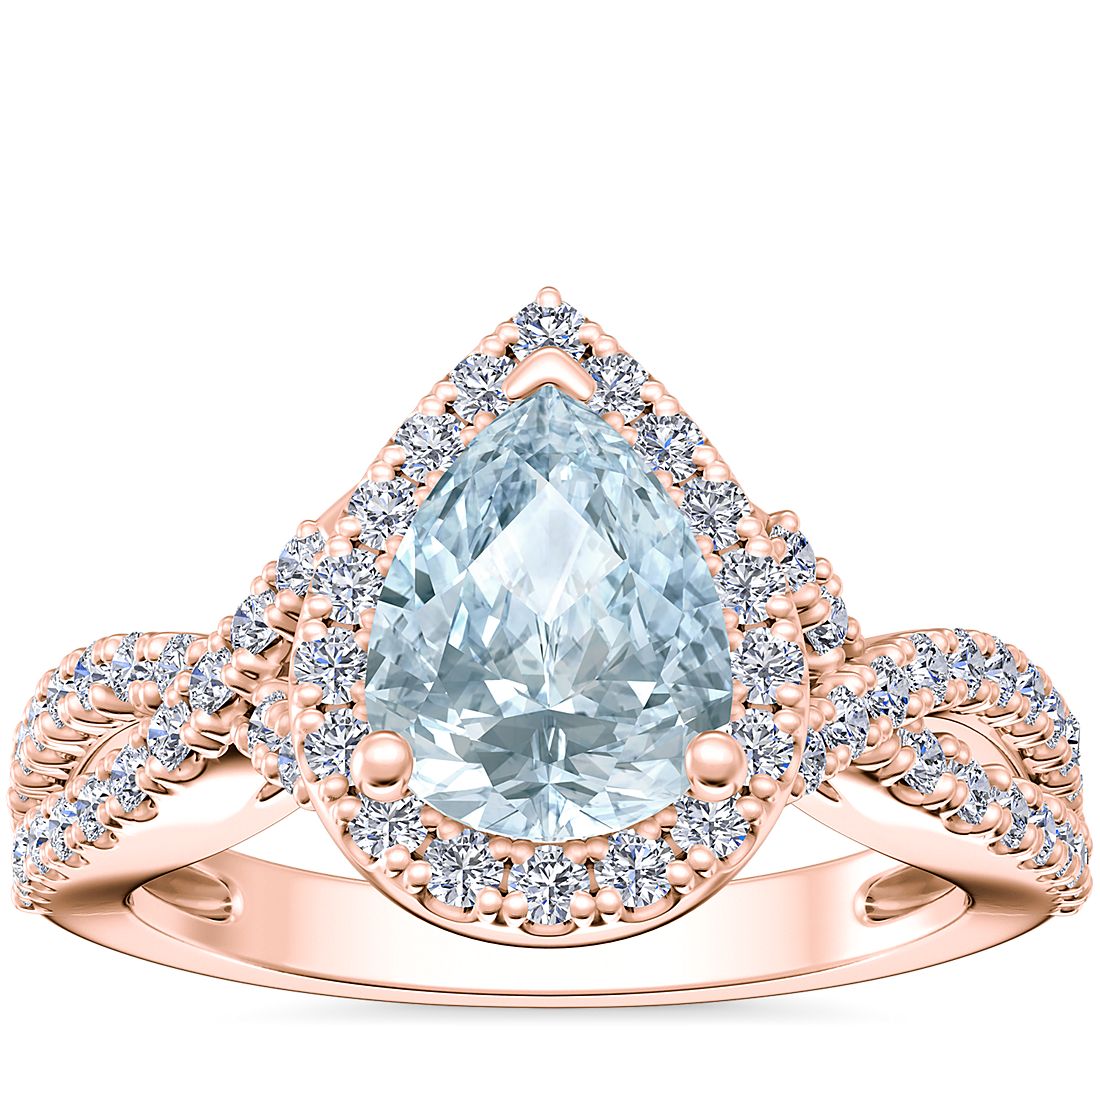 Twist Halo Diamond Engagement Ring with Pear-Shaped Aquamarine in 14k Rose Gold (8x6mm)